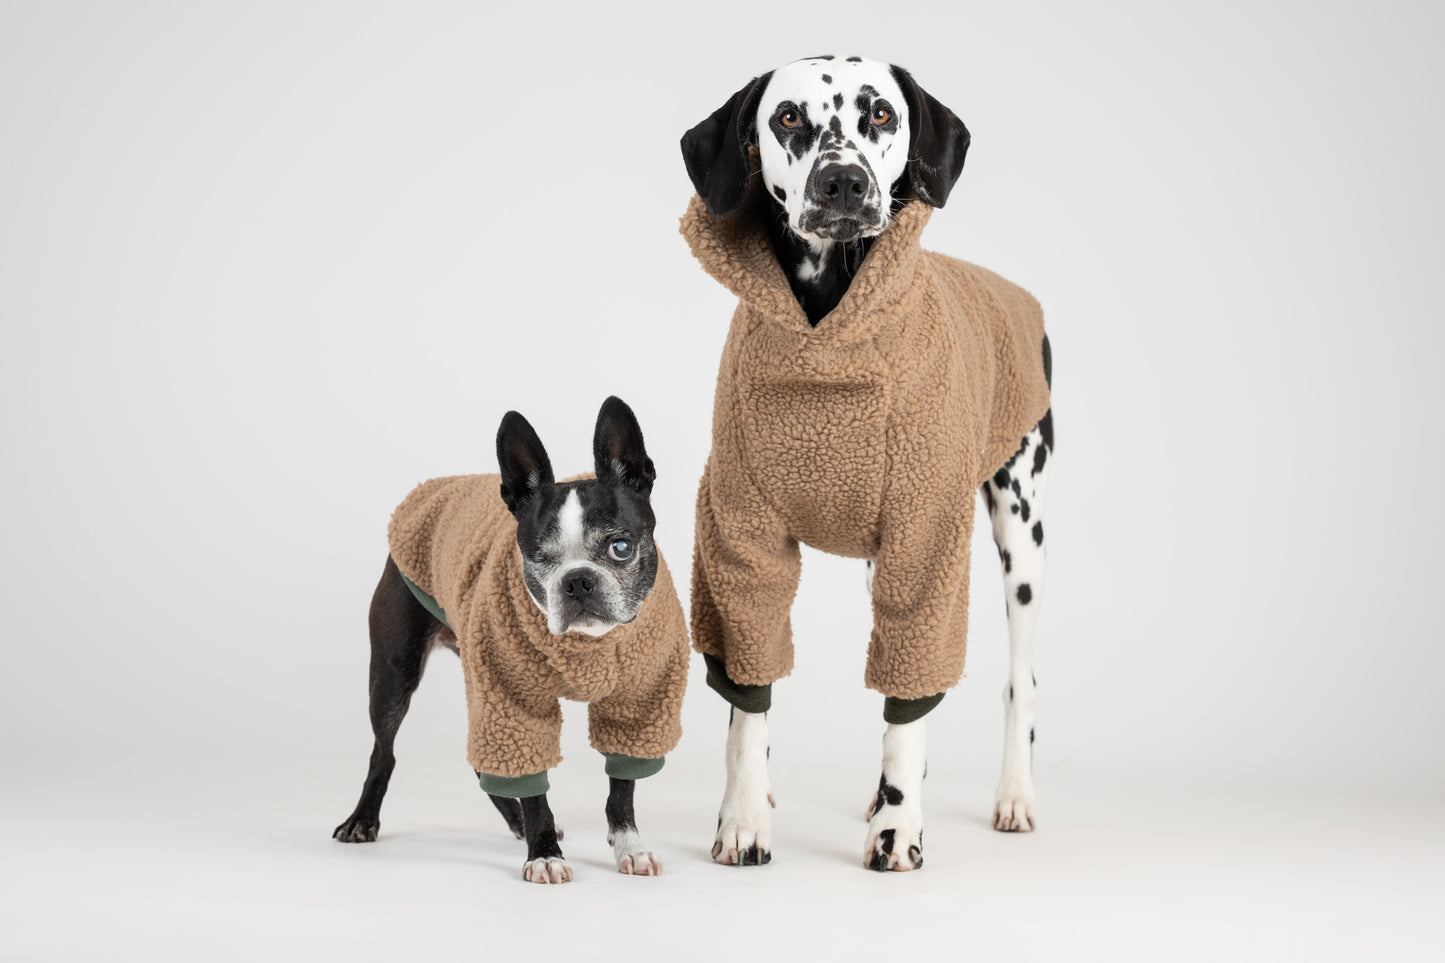 Made to measure sherpa for cats or dogs.